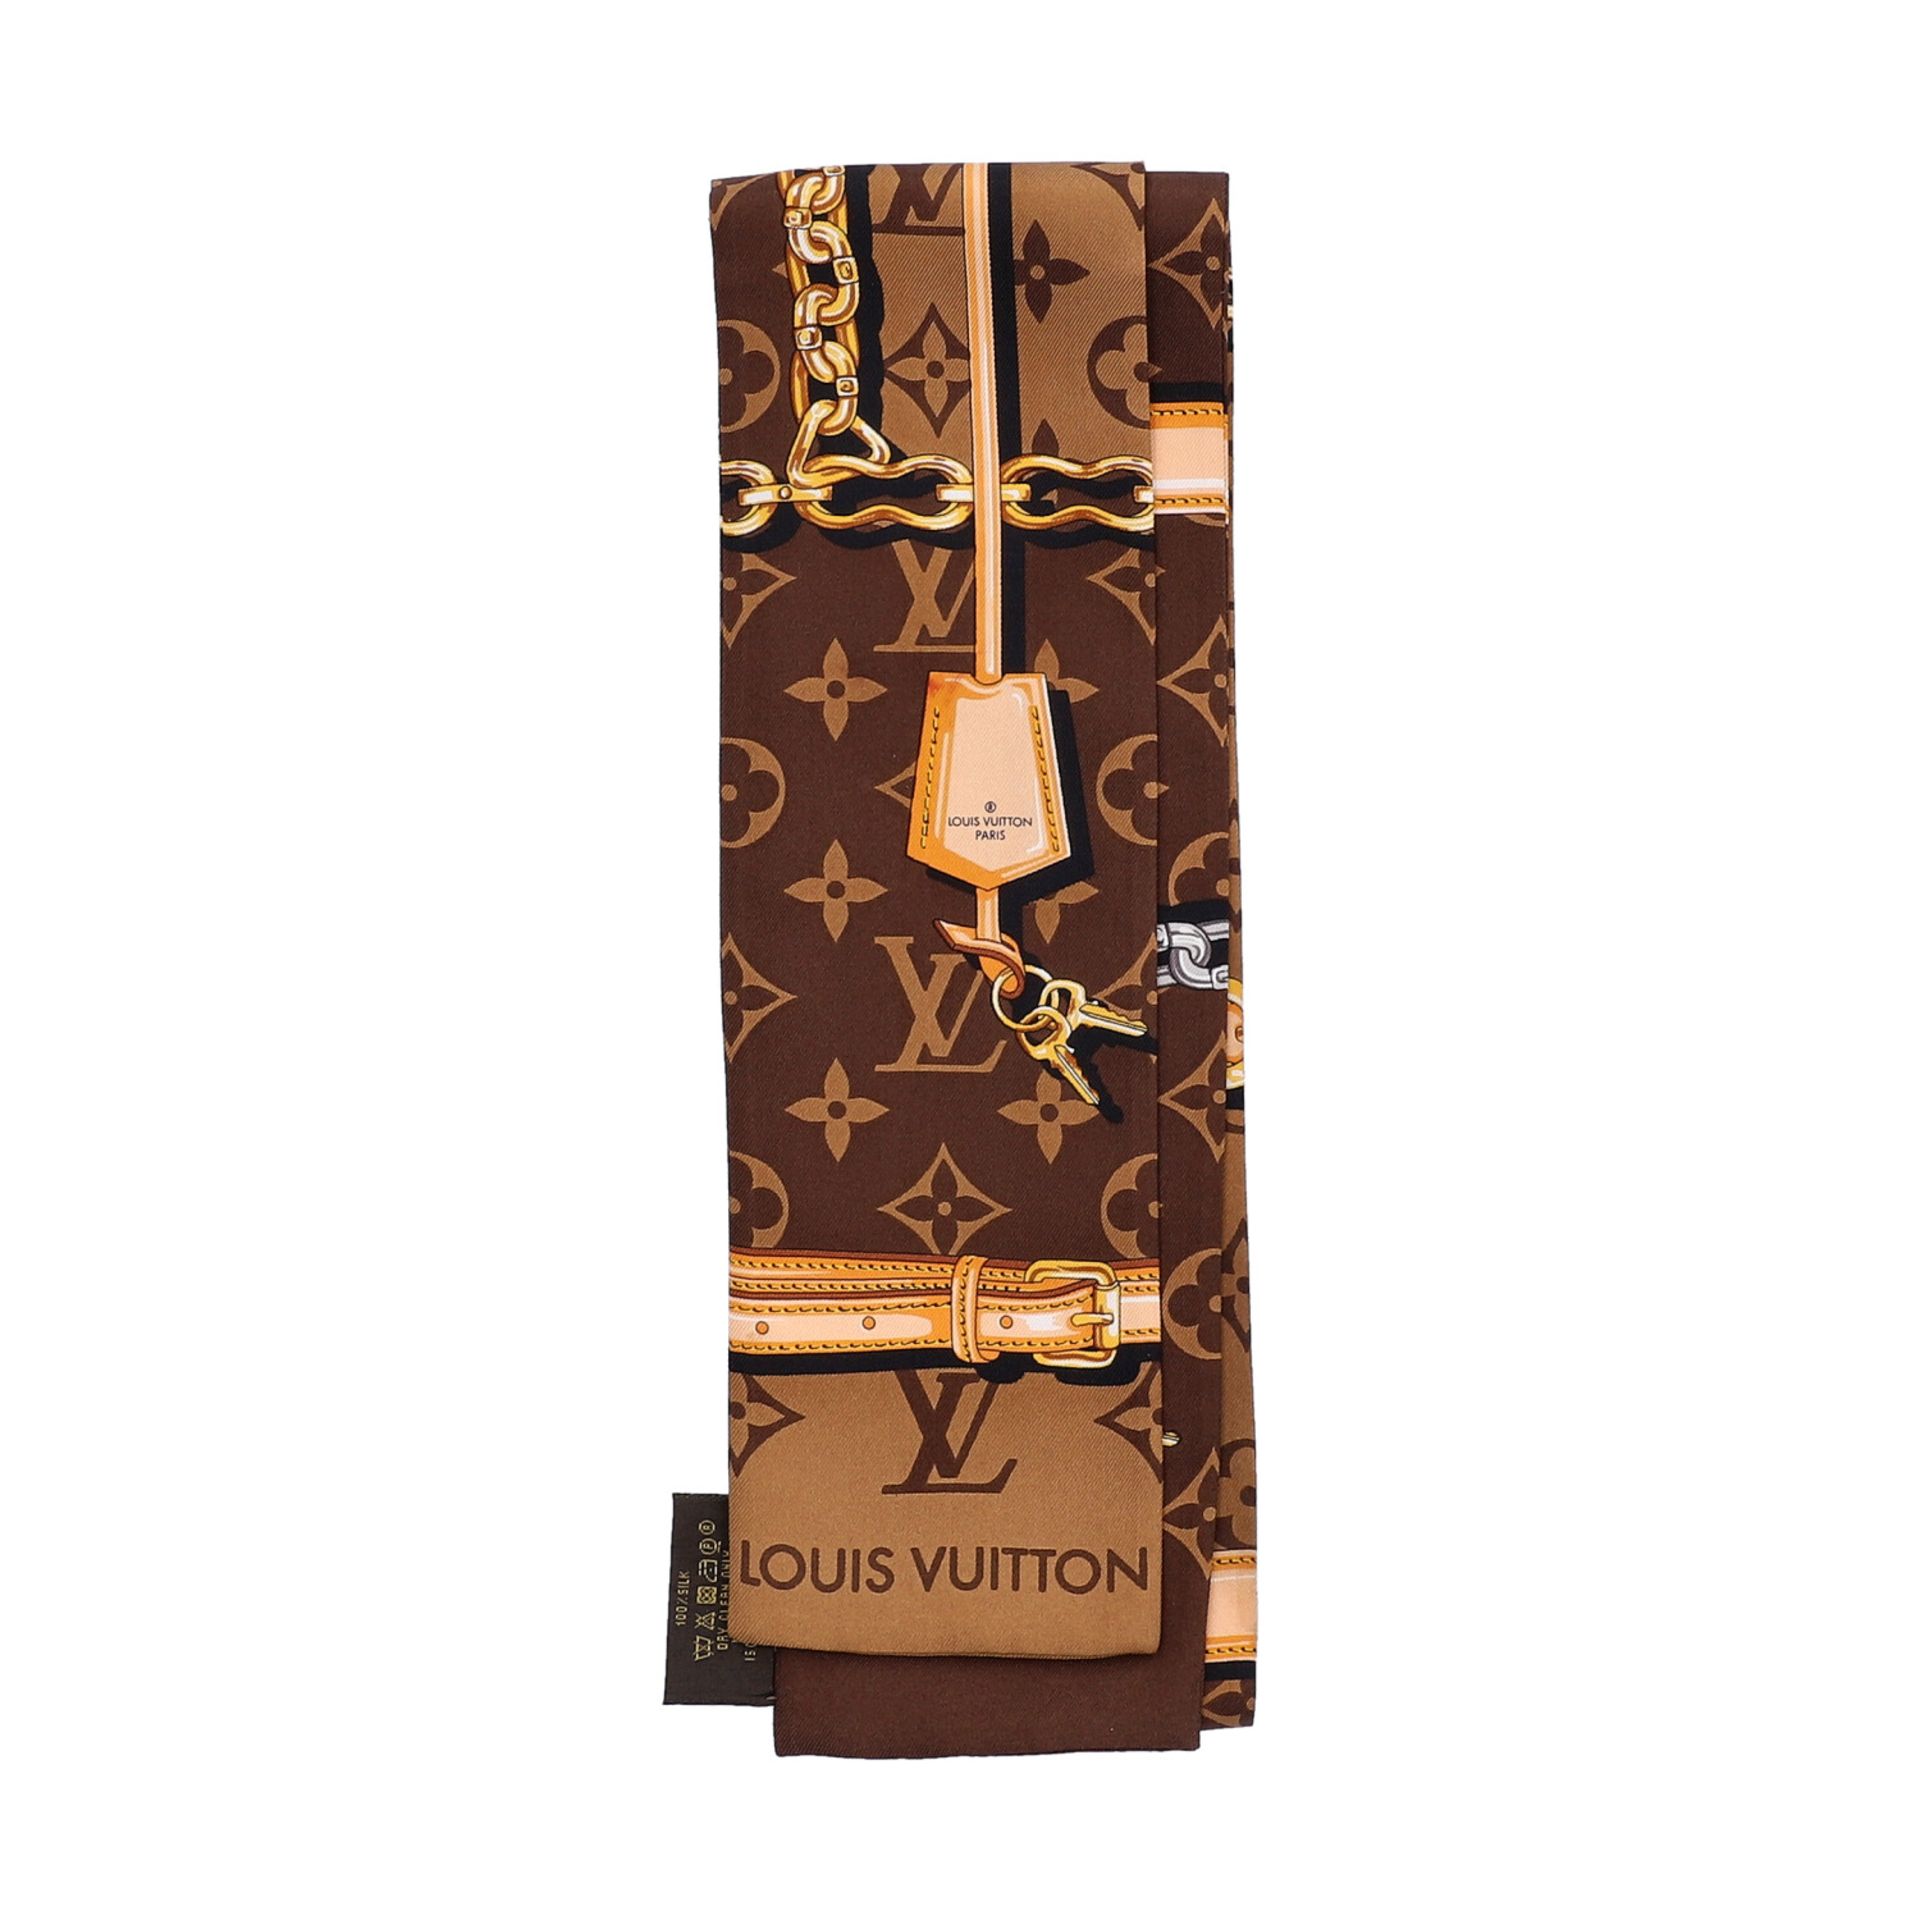 LOUIS VUITTON Twilly "MONOGRAM CONFIDENTIAL BANDEAU". - Image 2 of 4